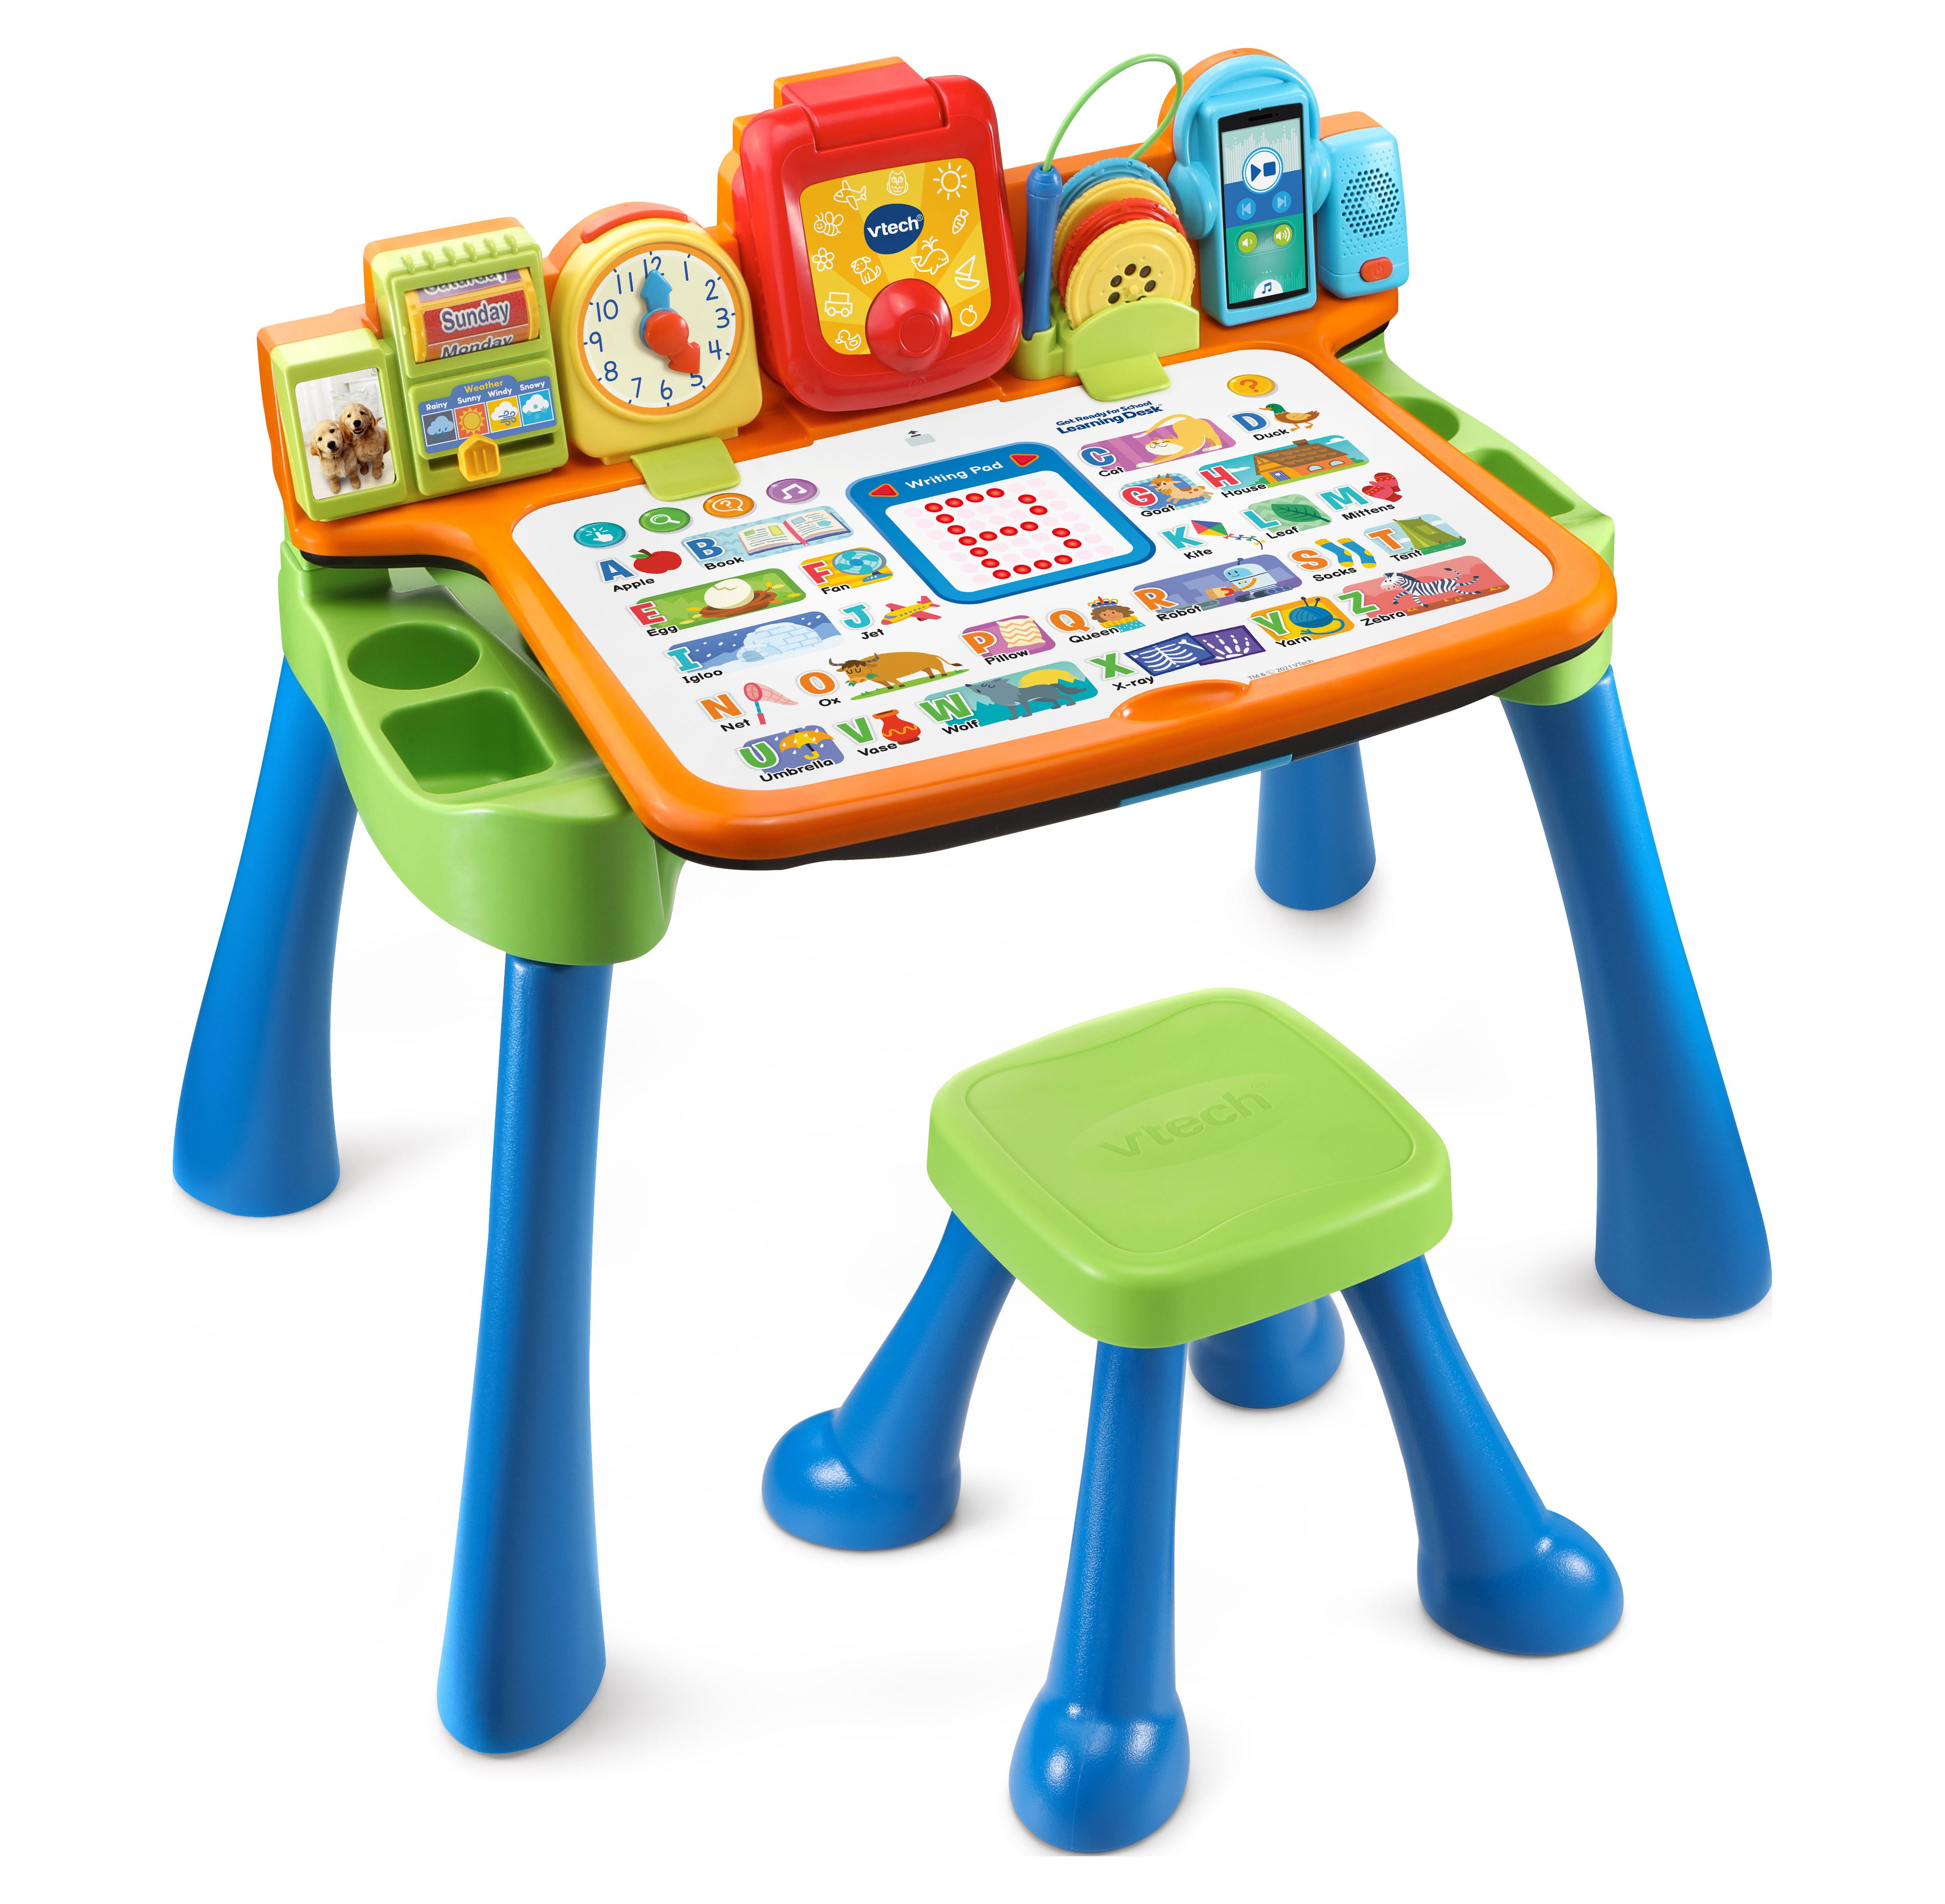 Get Ready For School Learning Desk - image 5 of 12